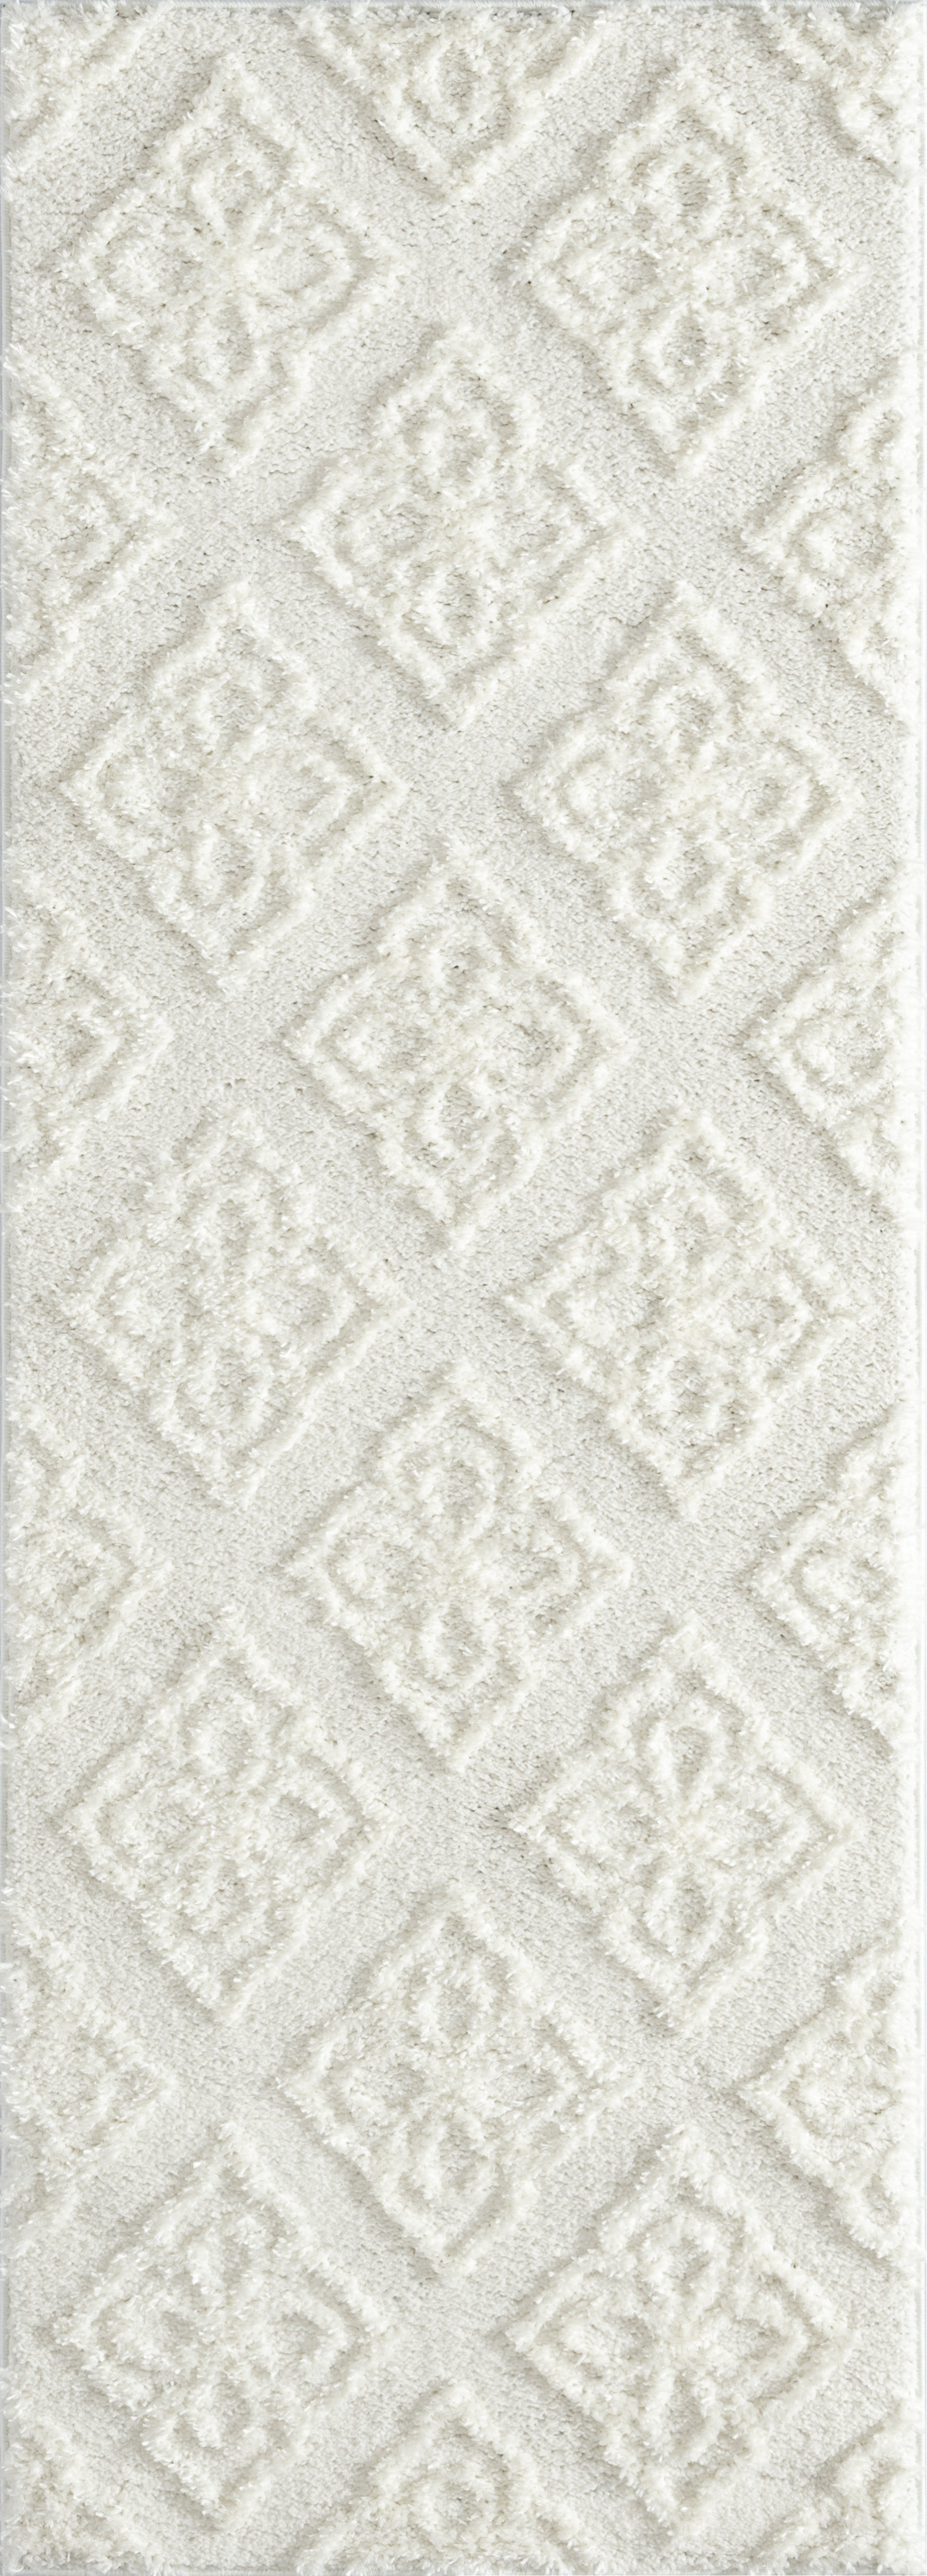 United Weavers Mellow Hollow White (2615-30299) Area Rug